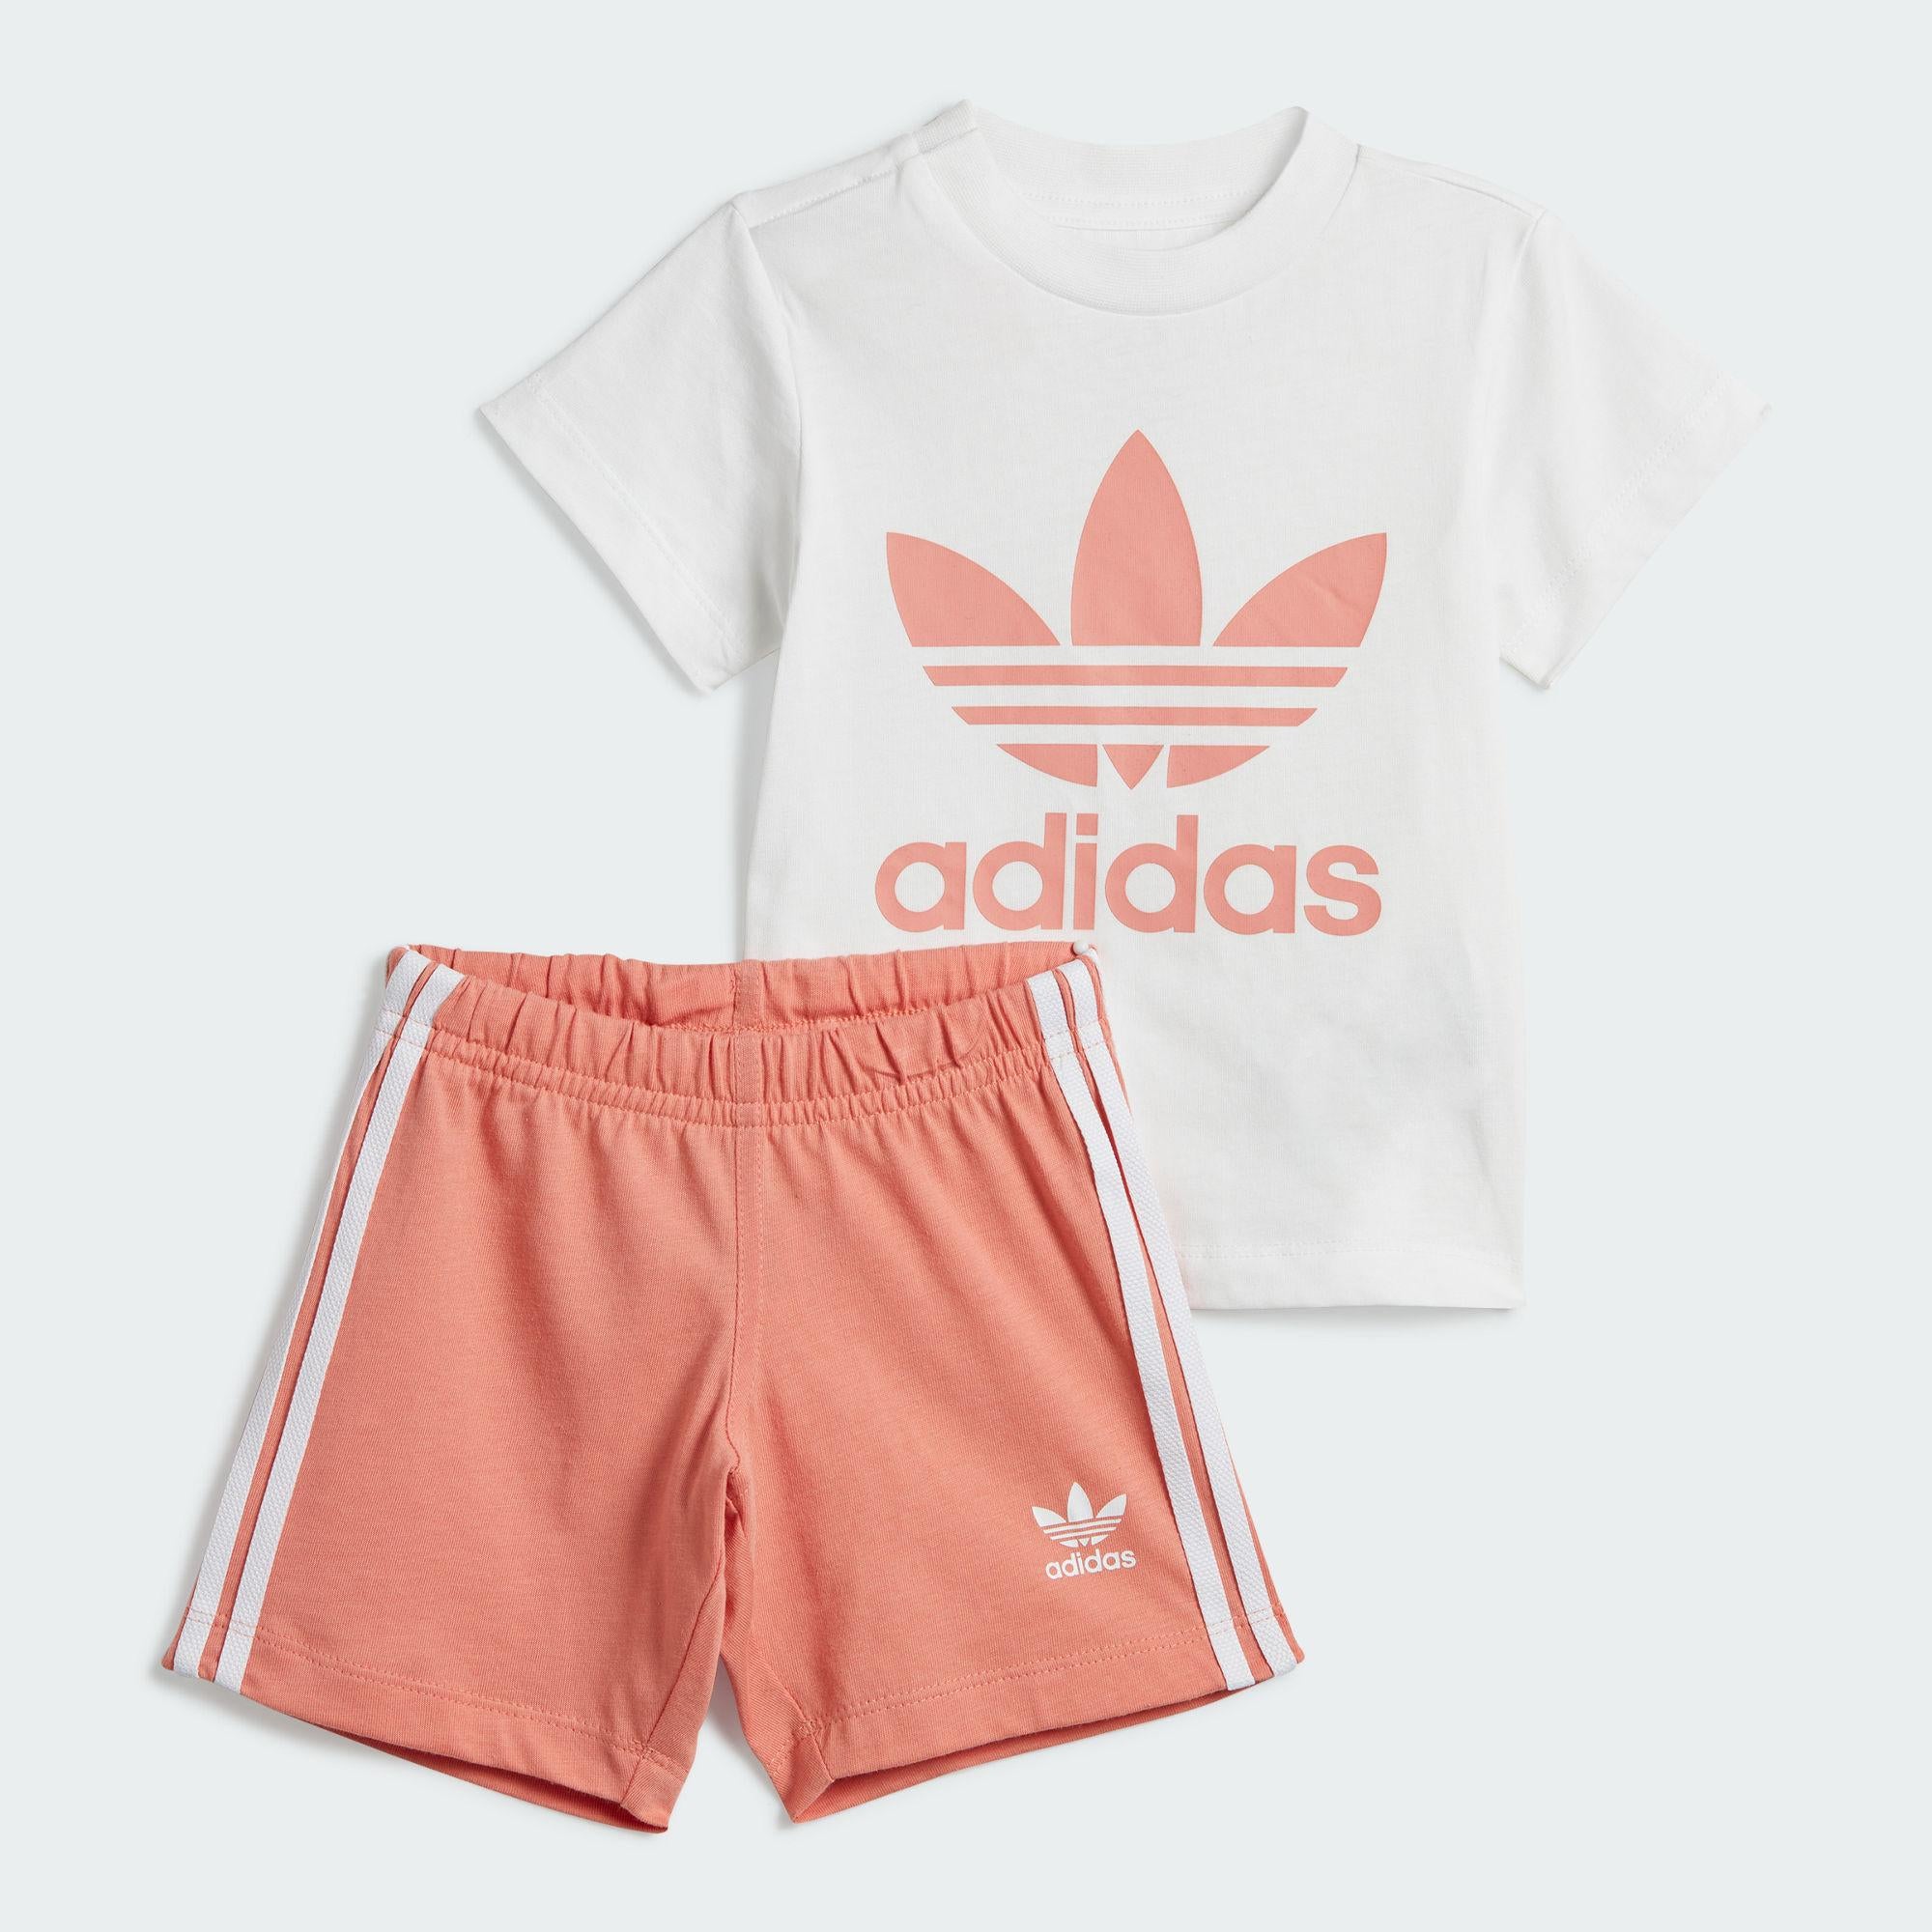 ADICOLOR, Adidas, clothes,  girl, Original,  套裝, 女嬰, 嬰童,  短袖, open for kids